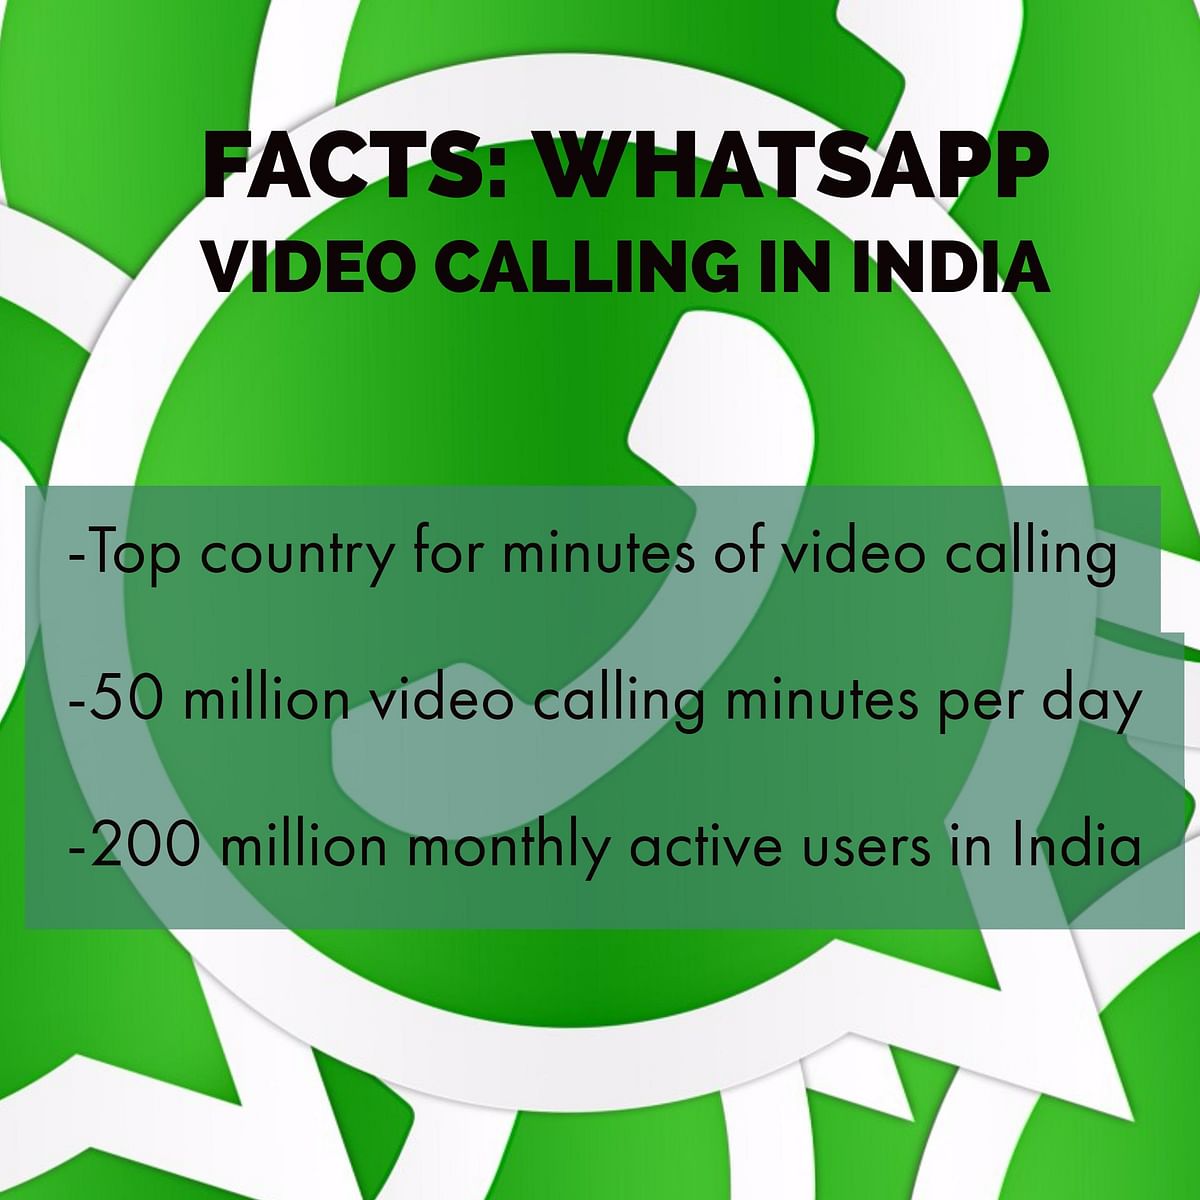 The messaging platform has made it big with the video calling feature in the country. But can it stay at the top?